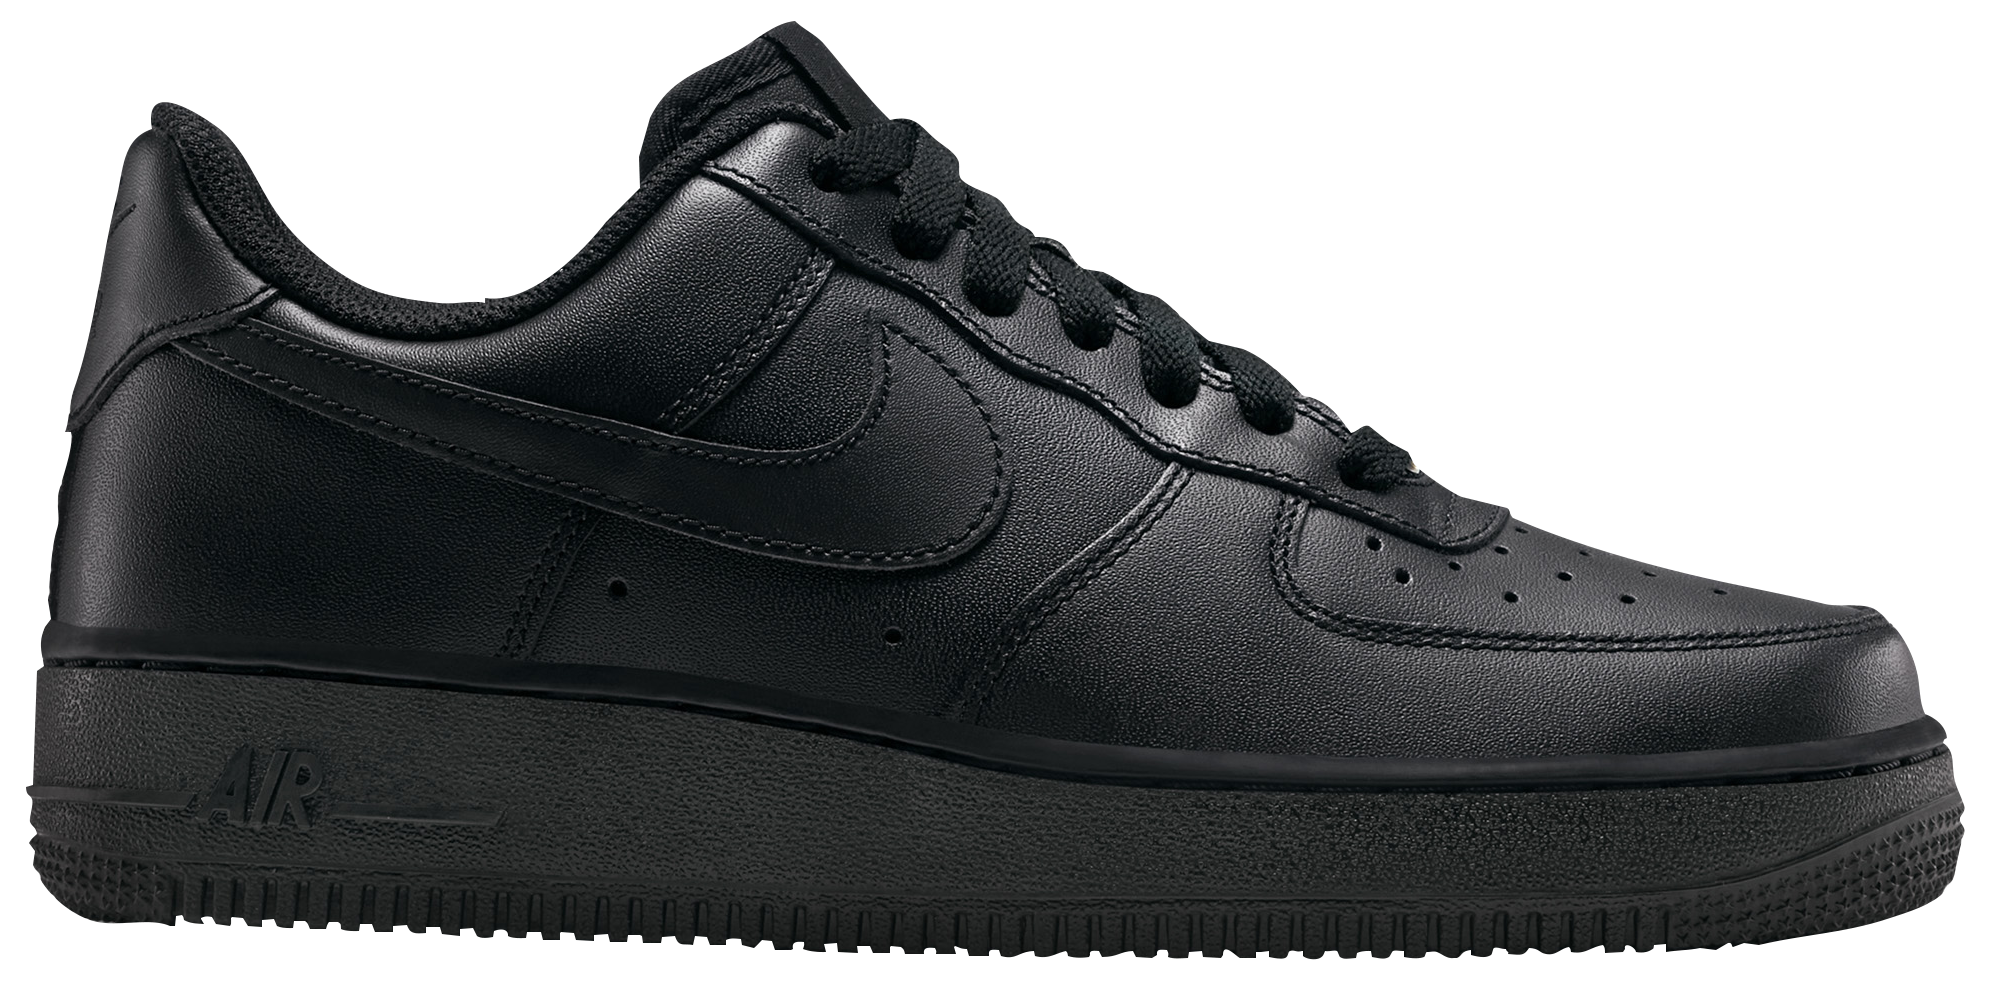 eastbay air force 1 low